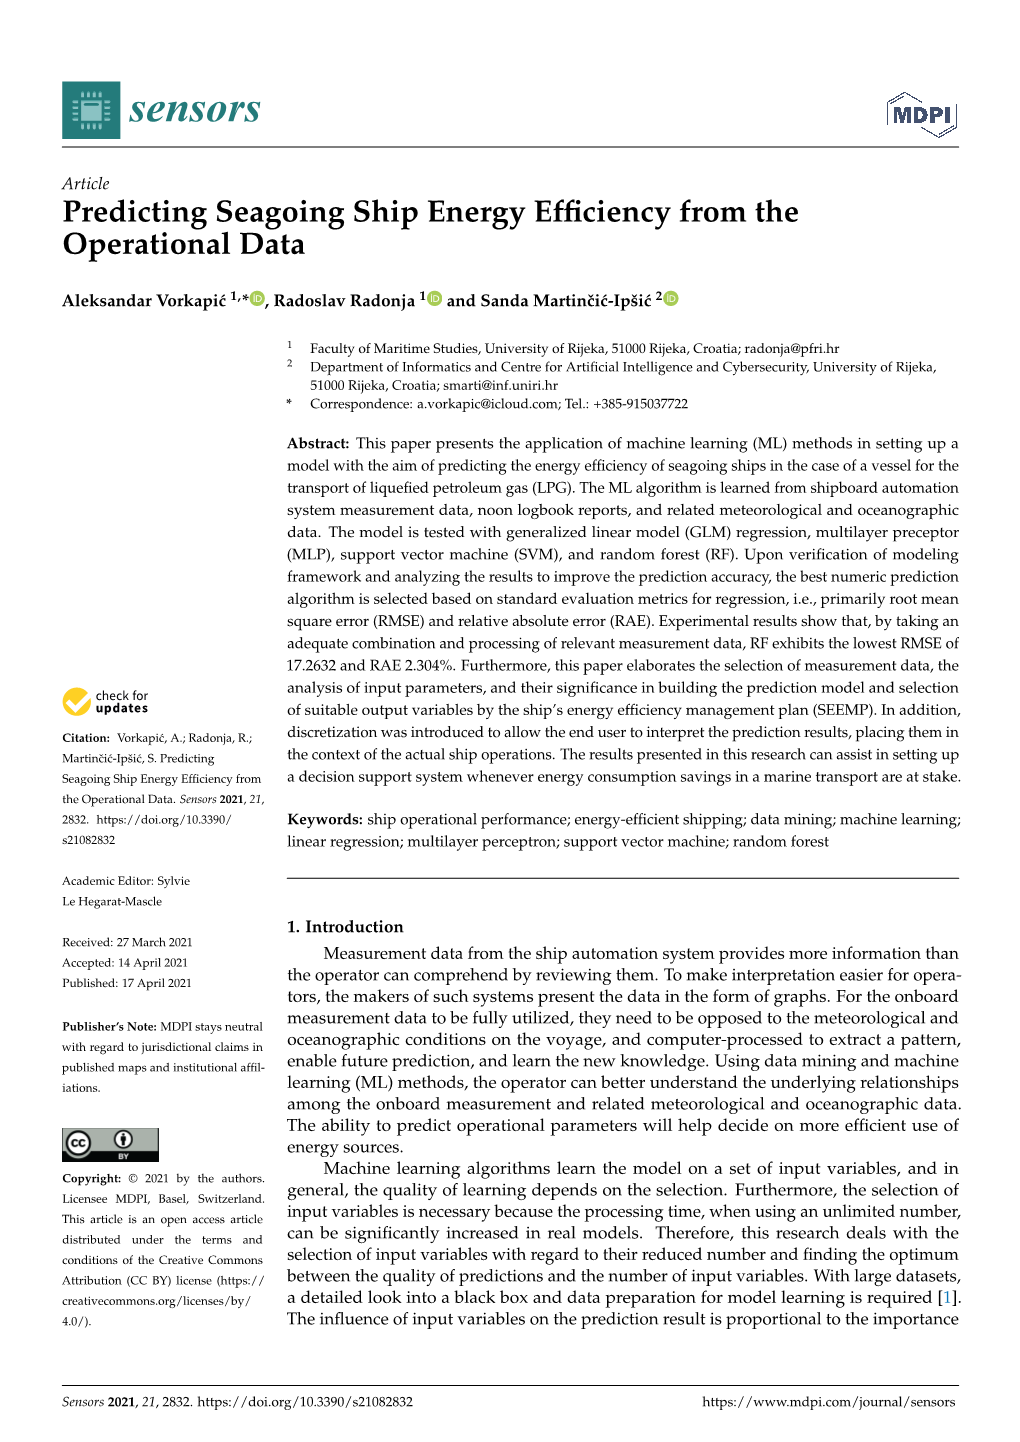 Predicting Seagoing Ship Energy Efficiency from the Operational Data